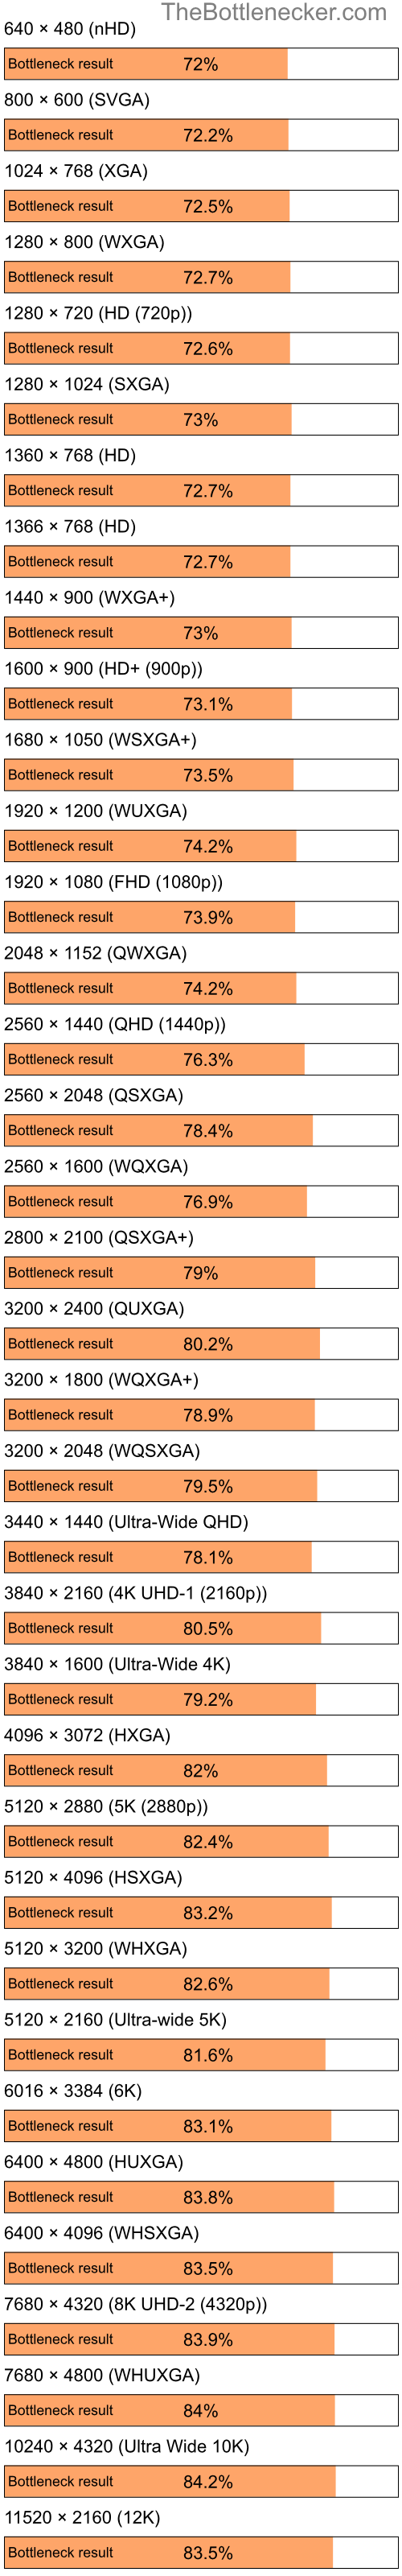 Bottleneck results by resolution for Intel Pentium 4 and NVIDIA GeForce 7200 GS in Processor Intense Tasks